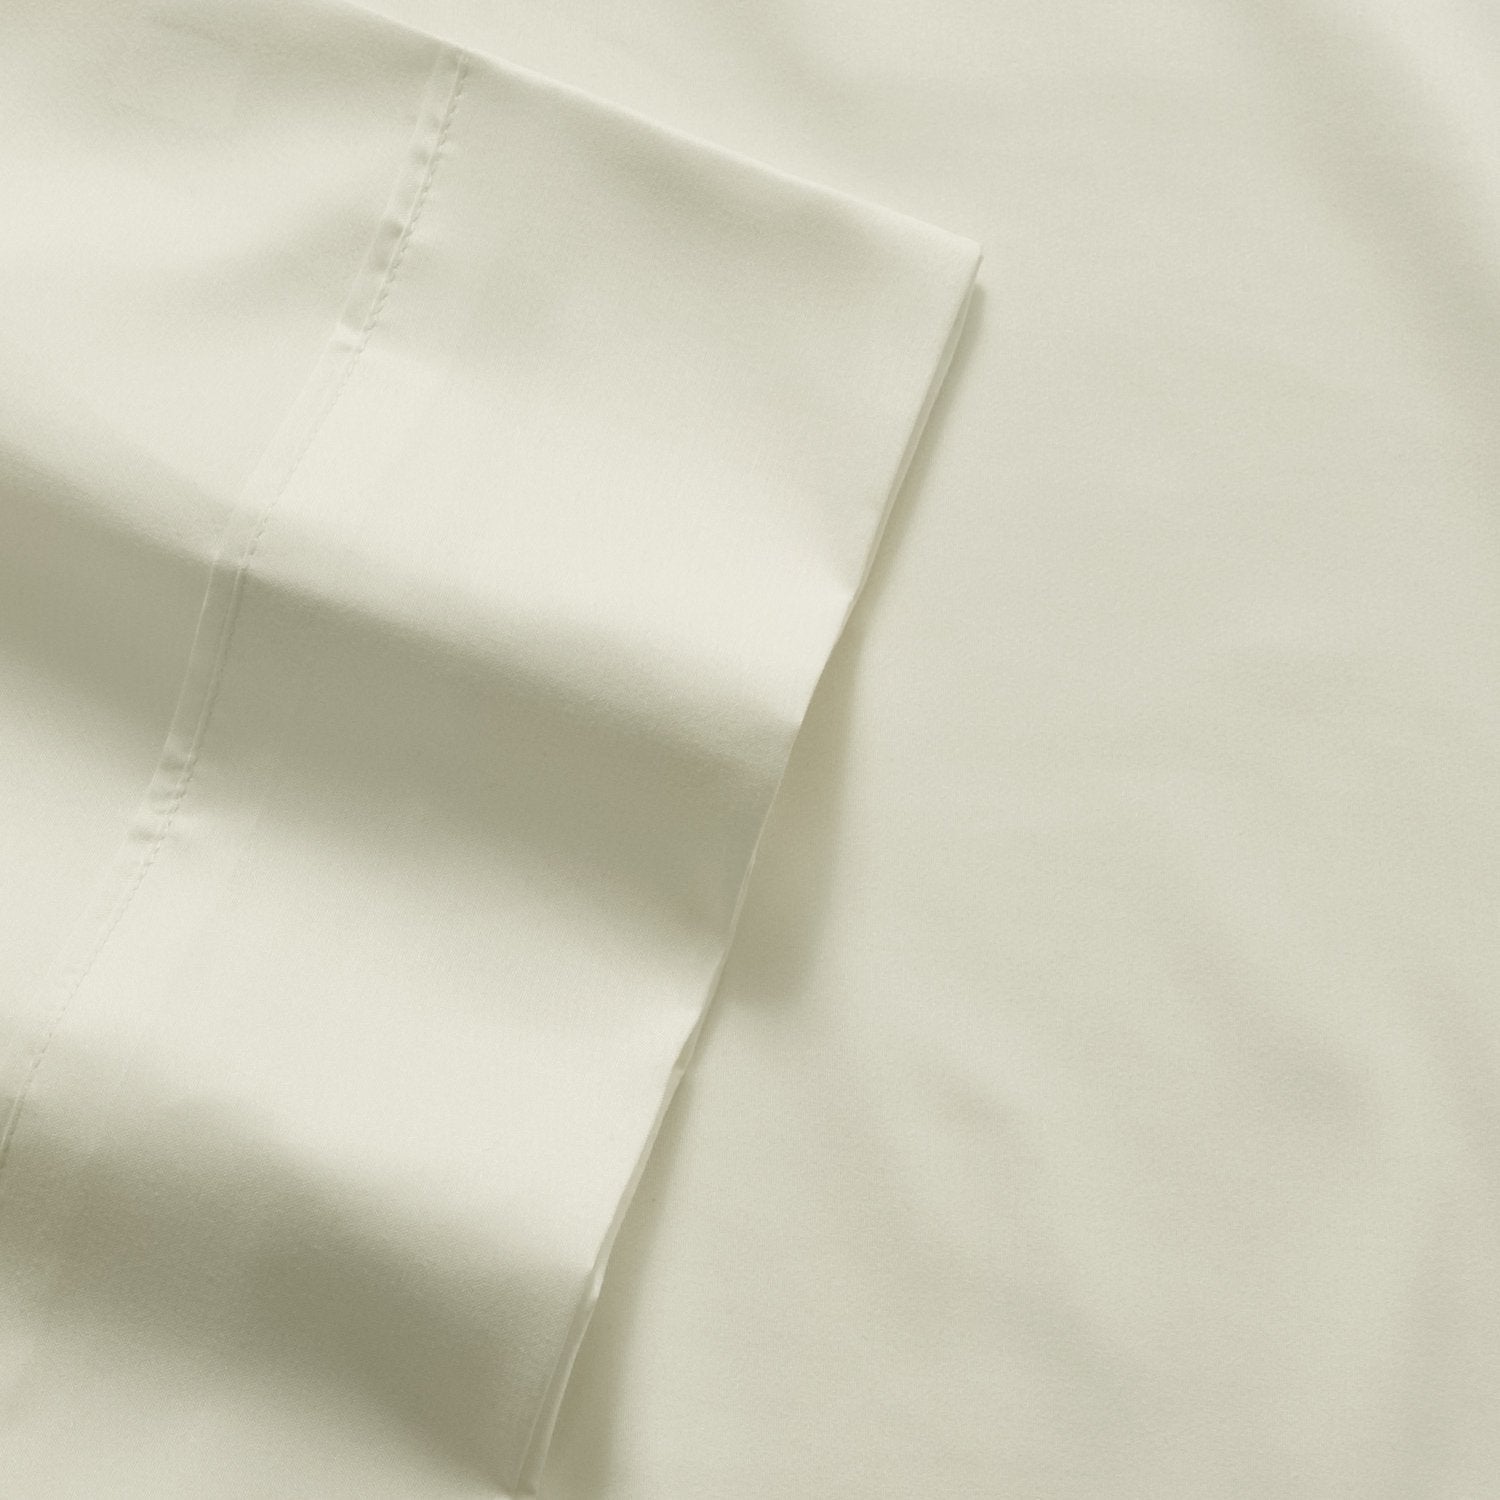 Deluxe 6-Piece Bed Sheet Set (Ivory) - Fabric